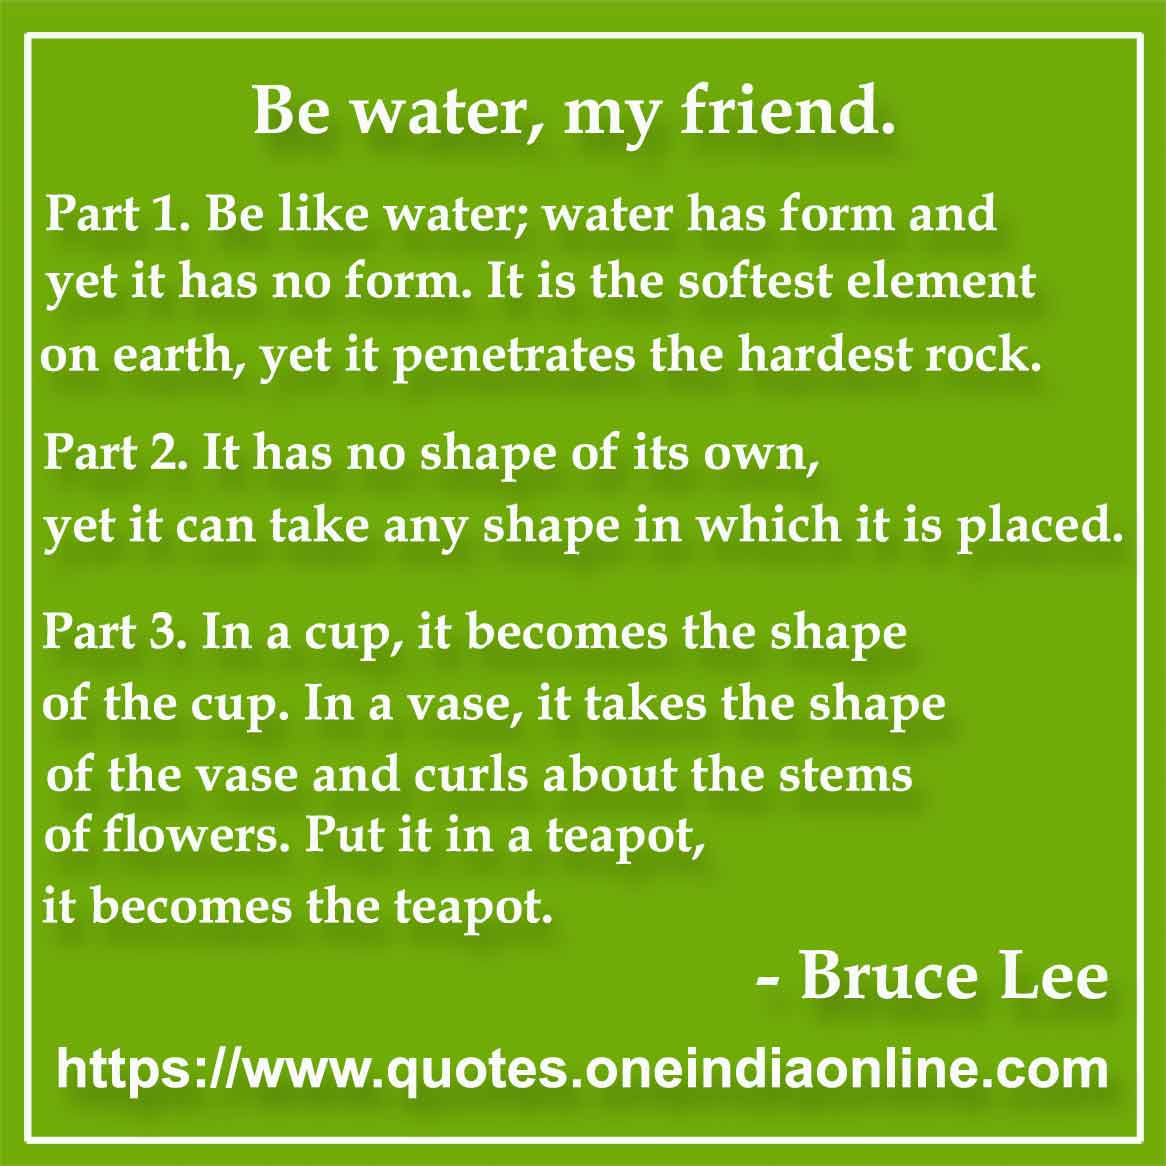 Part 1. Be like water; water has form and yet it has no form. It is the softest element on earth, yet it penetrates the hardest rock. Part 2. It has no shape of its own, yet it can take any shape in which it is placed. Part 3. In a cup, it becomes the shape of the cup. In a vase, it takes the shape of the vase and curls about the stems of flowers. Put it in a teapot, it becomes the teapot.

Bruce Lee